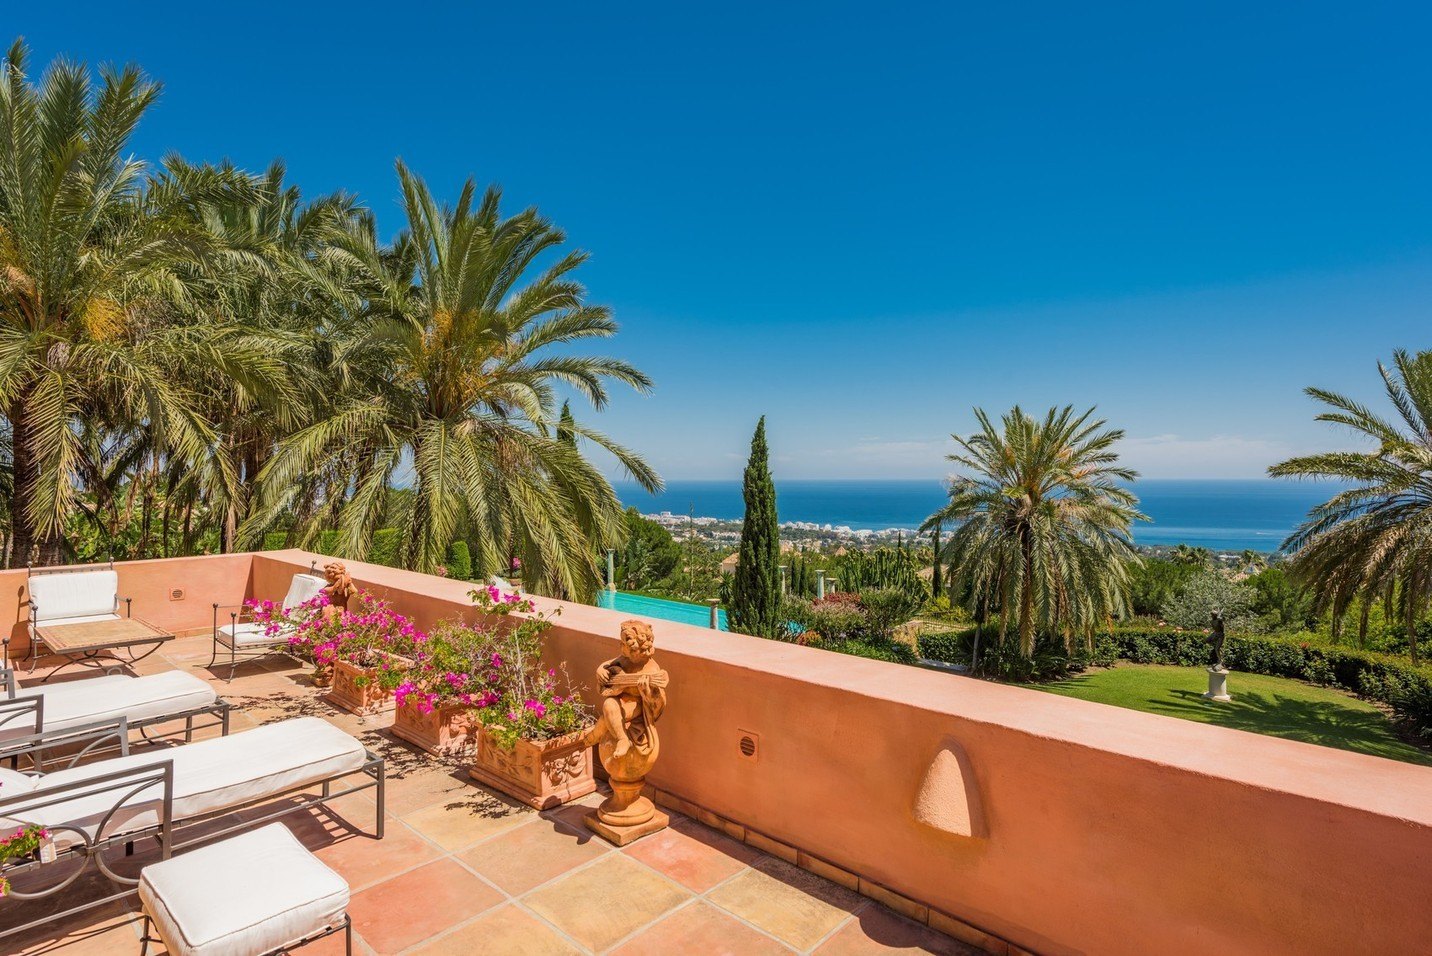 Sierra Blanca, peace in a prime location close to Marbella tow